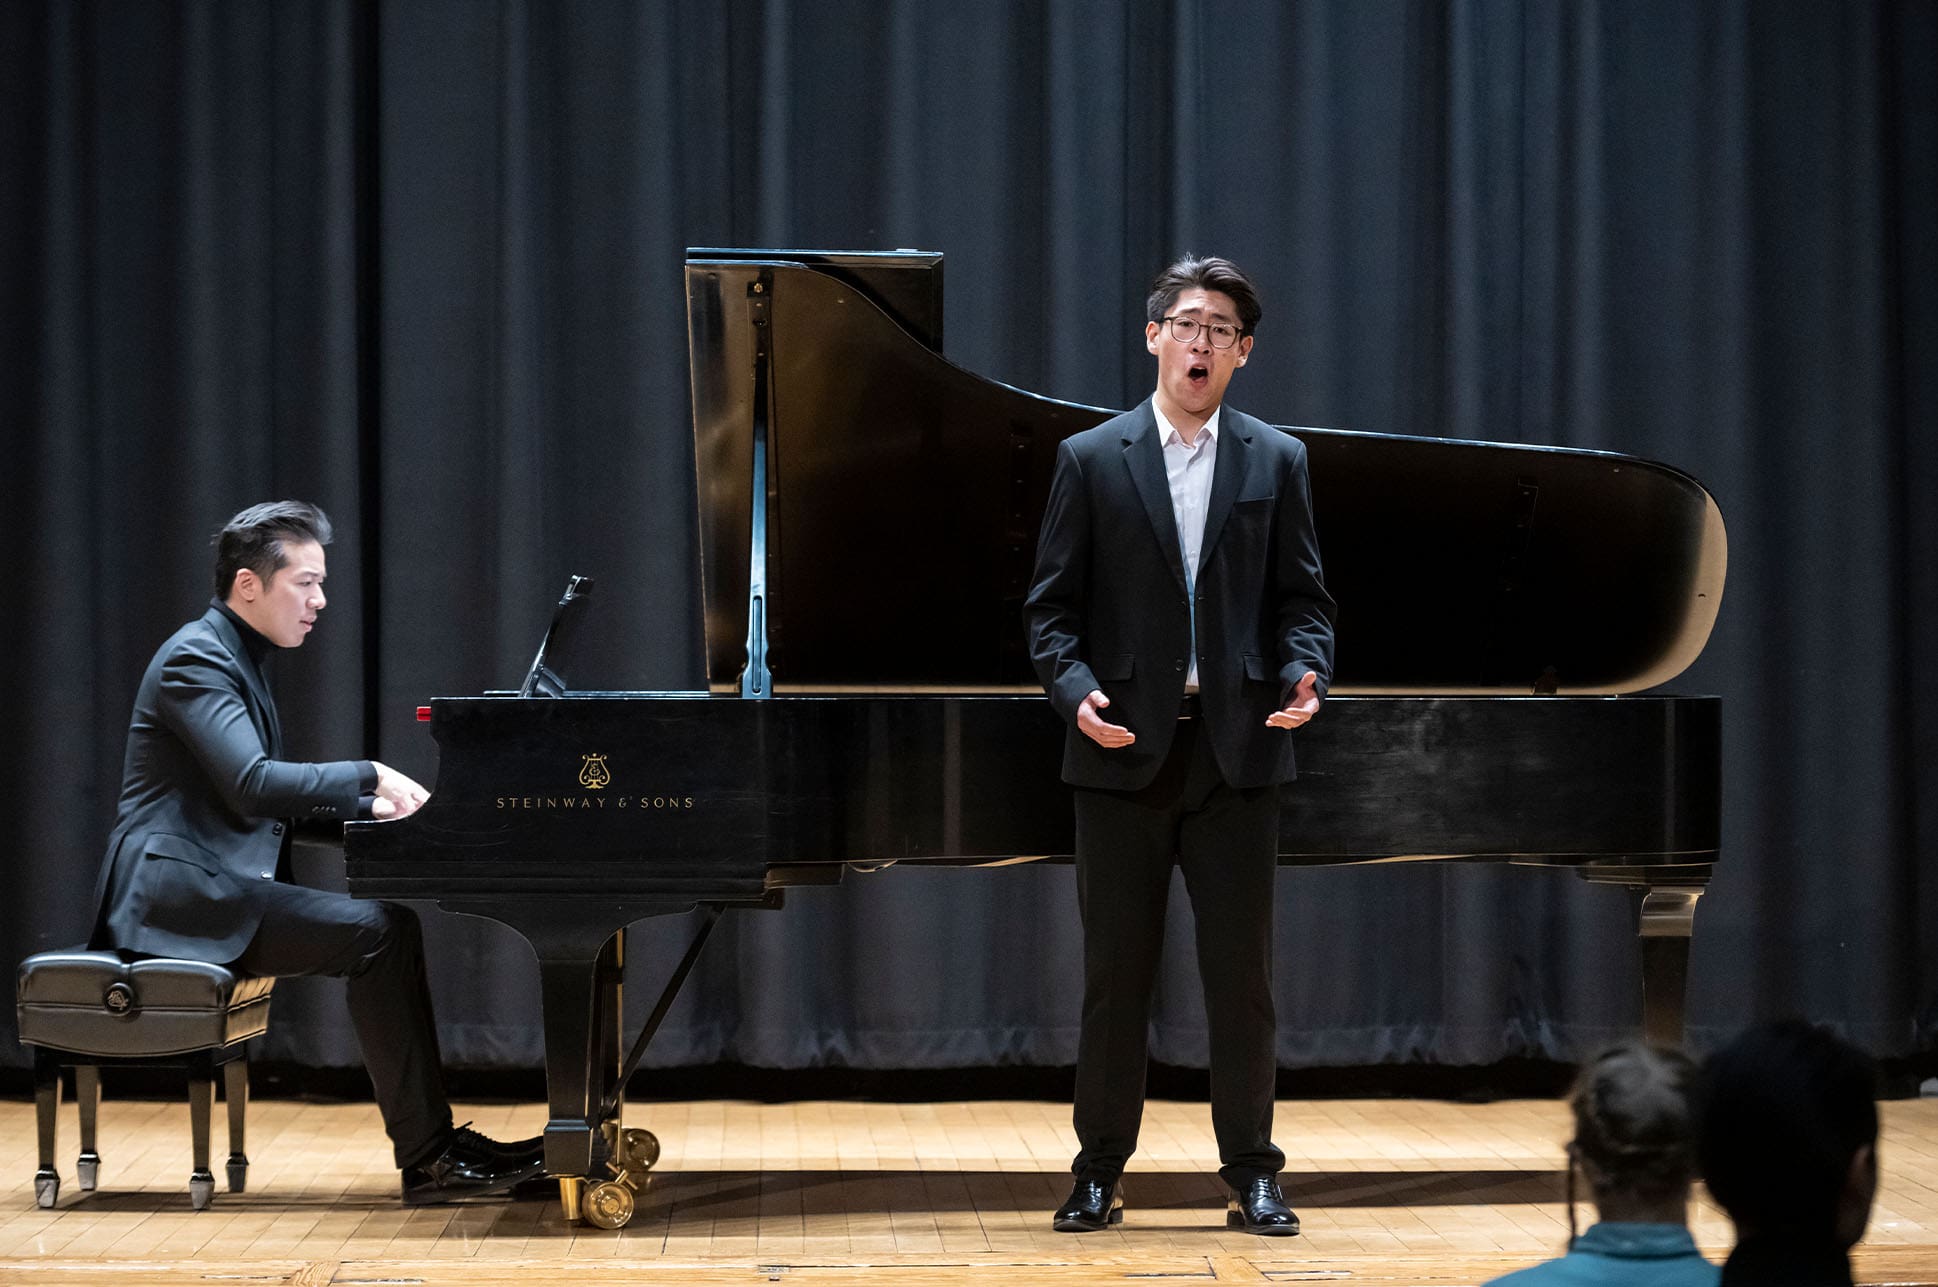 Student singing in front of a pianist on a stage.